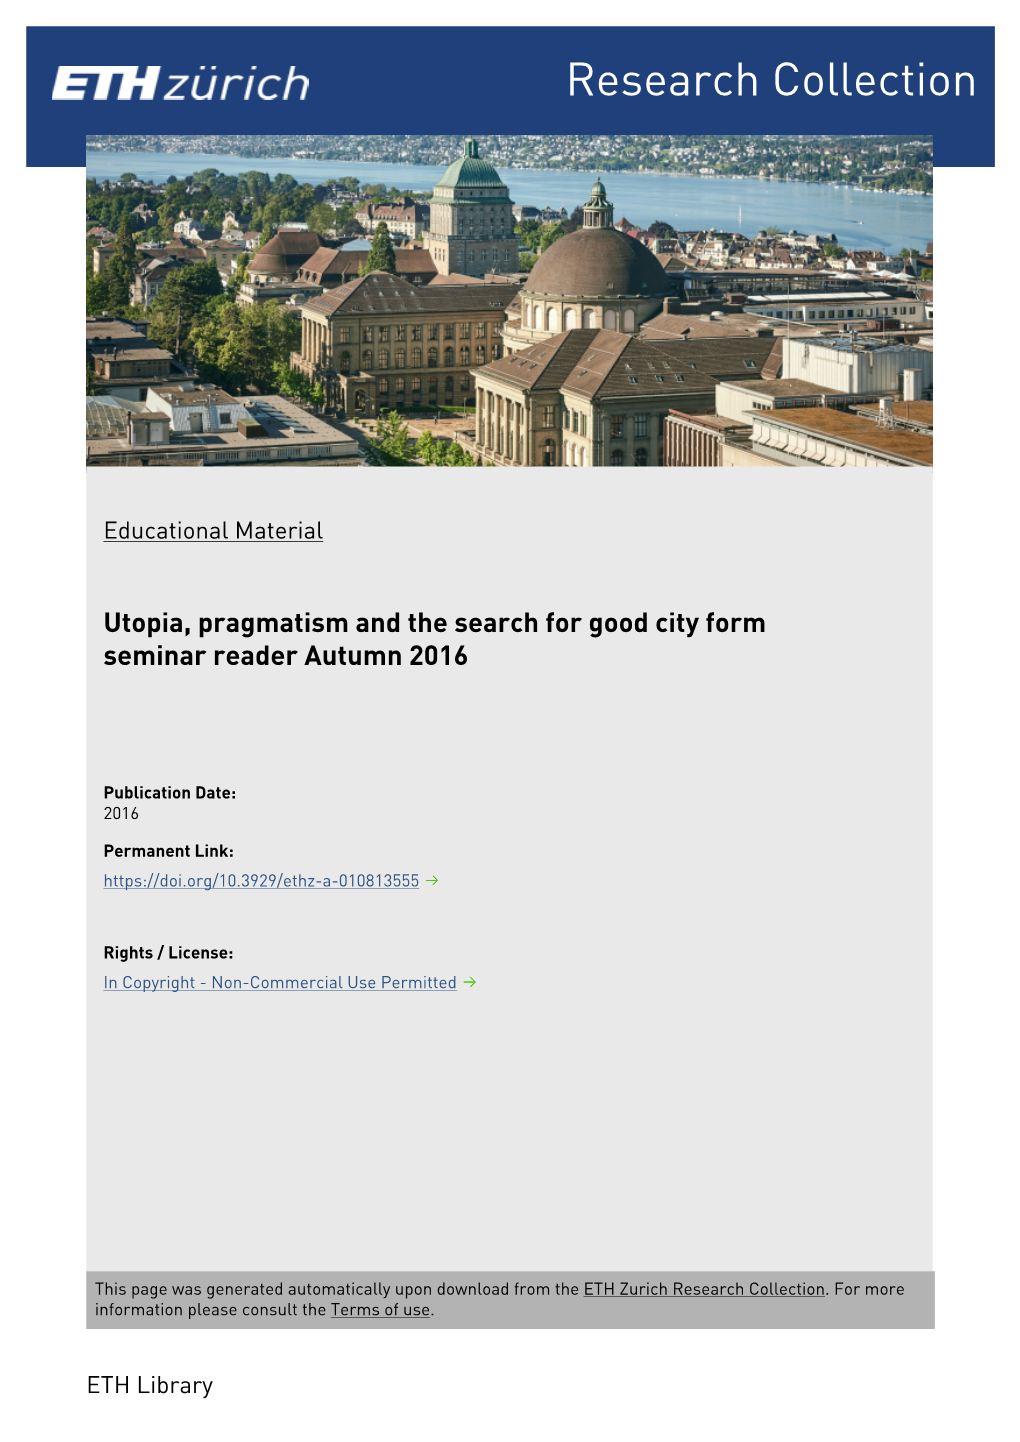 Utopia, Pragmatism and the Search for Good City Form Seminar Reader Autumn 2016